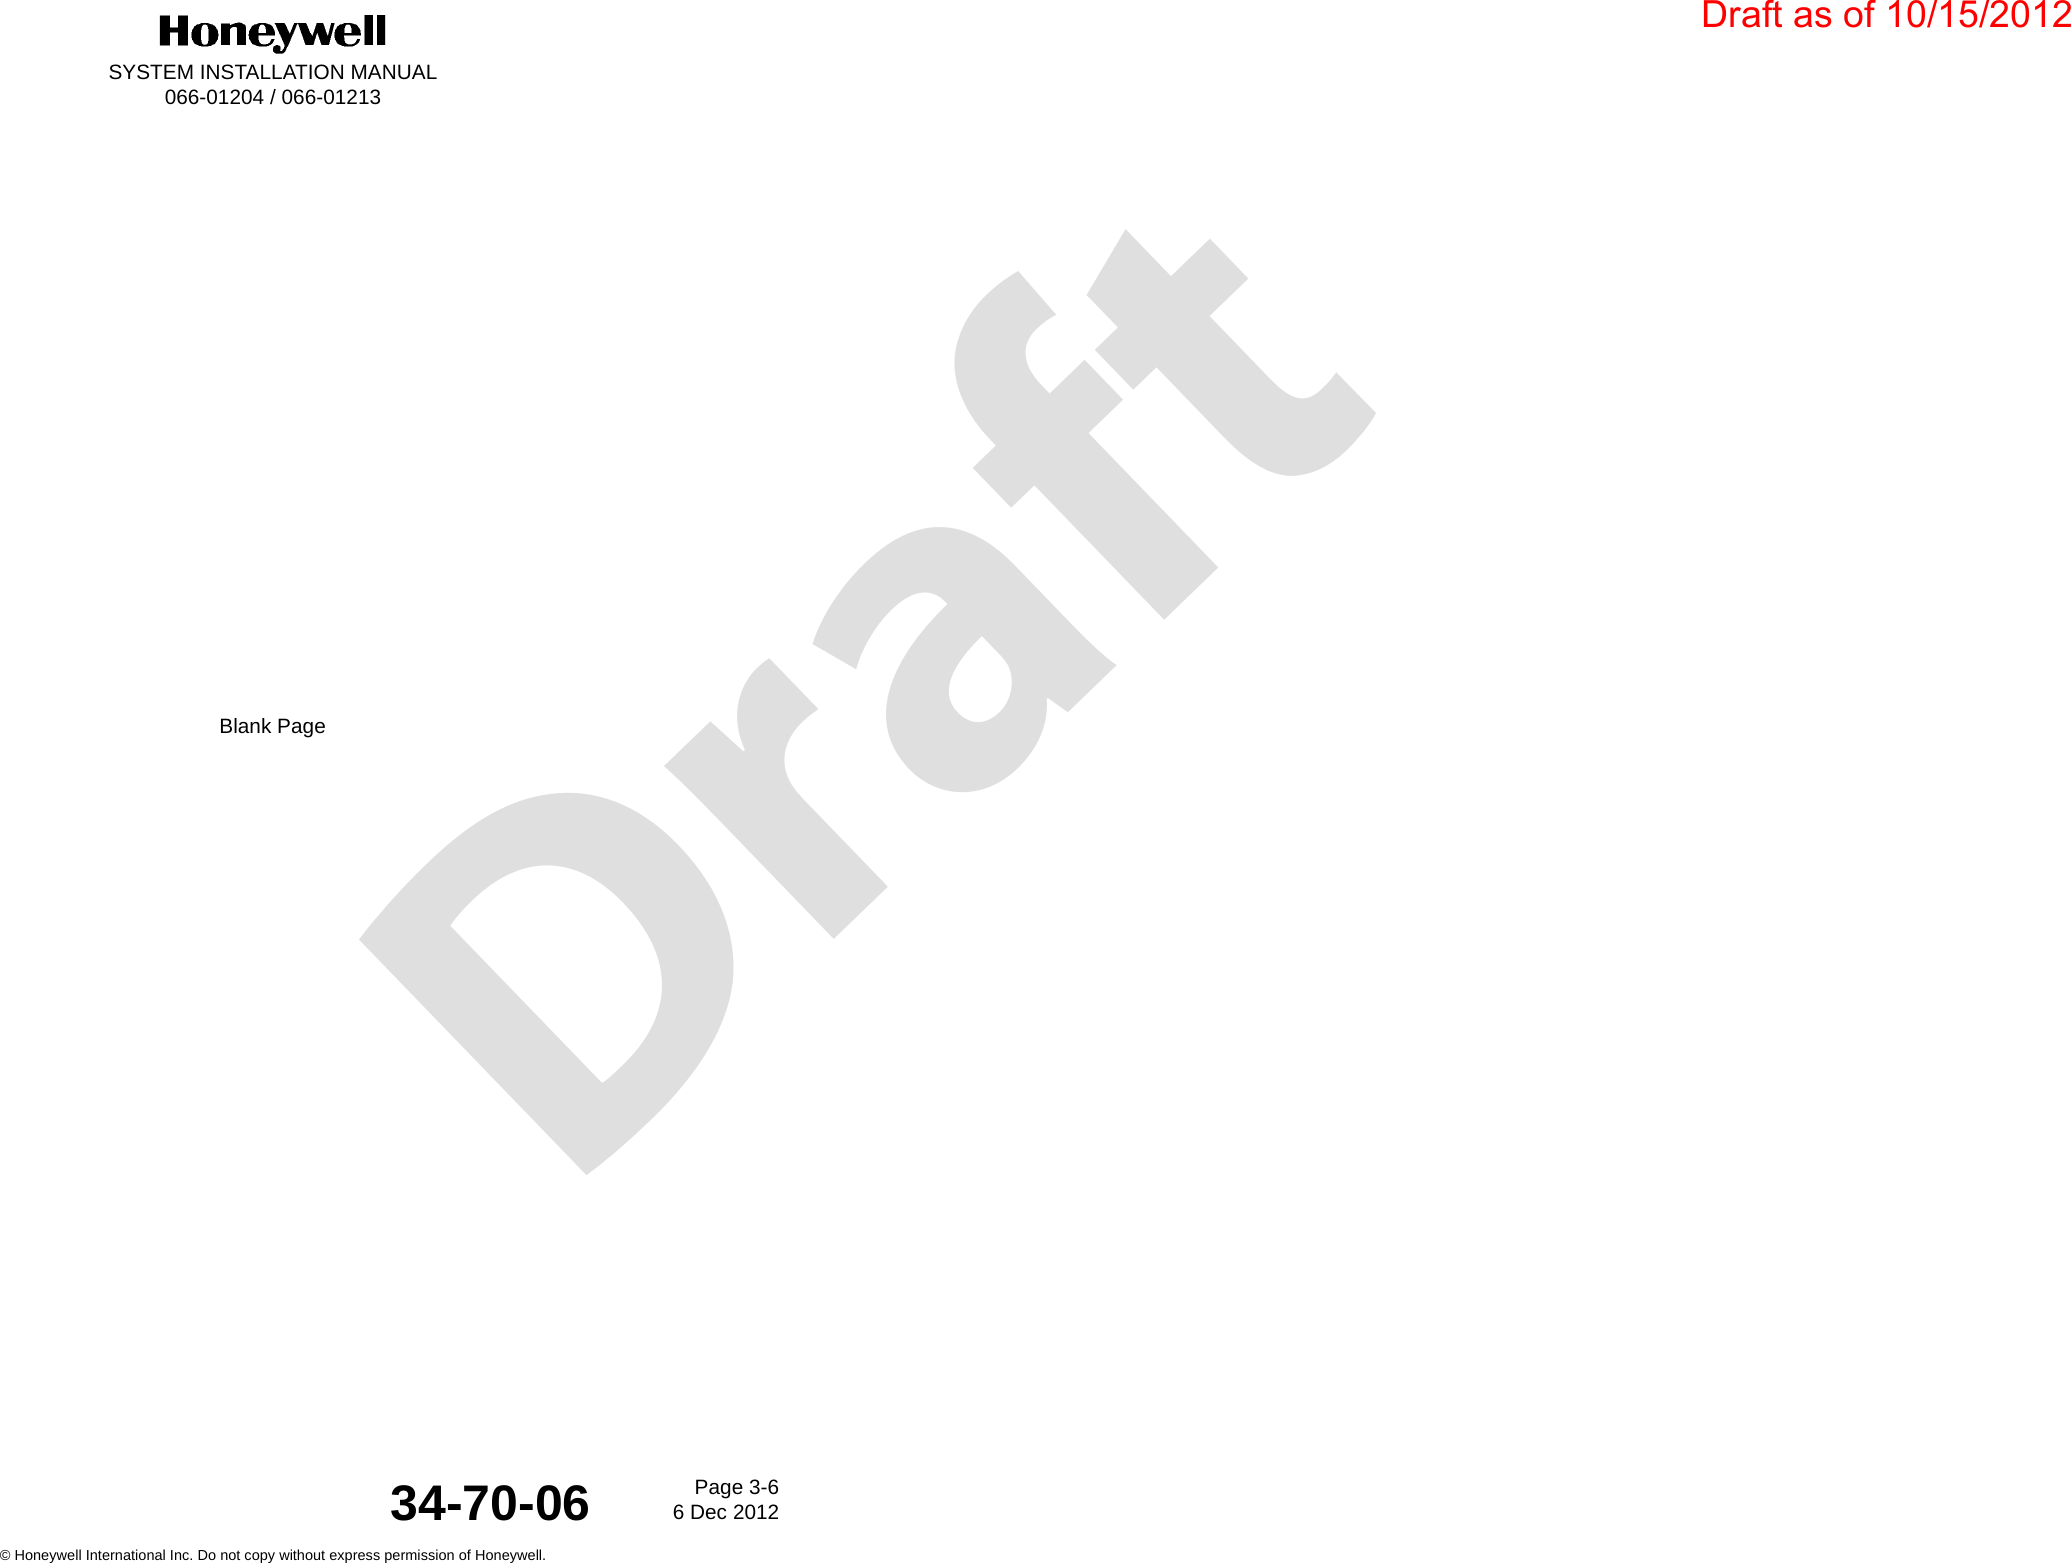 DraftSYSTEM INSTALLATION MANUAL066-01204 / 066-01213Page 3-66 Dec 2012© Honeywell International Inc. Do not copy without express permission of Honeywell.34-70-06Blank PageDraft as of 10/15/2012